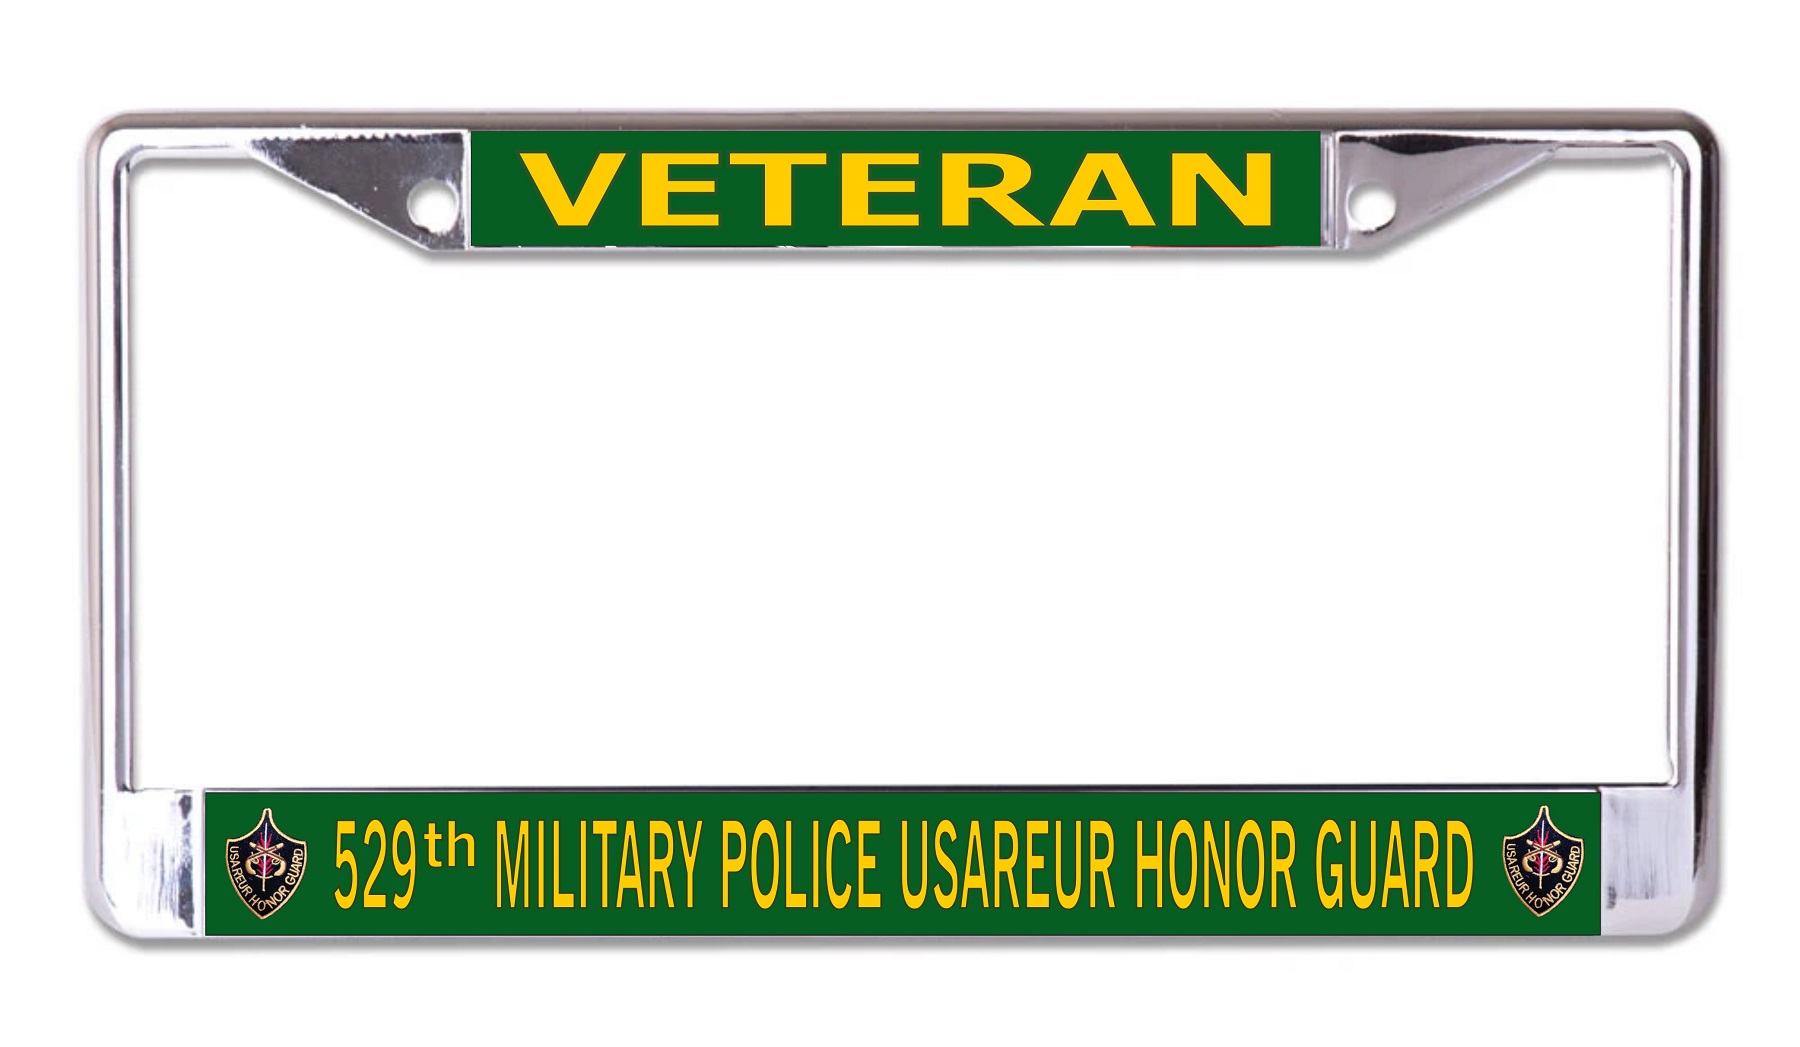 Veteran 529th Military Police Usareur Honor Guard Chrome LICENSE PLATE Frame